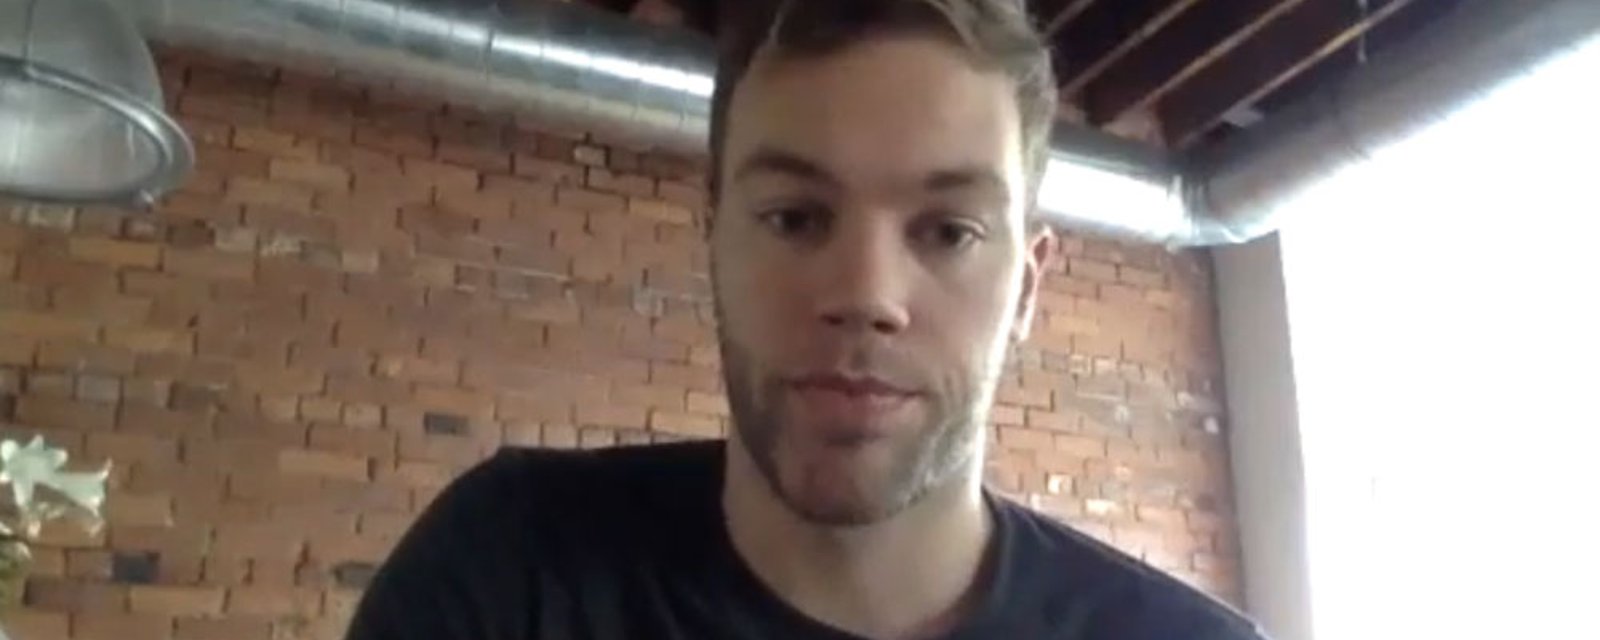 Taylor Hall's teammates with some cryptic words about his future with the Blackhawks